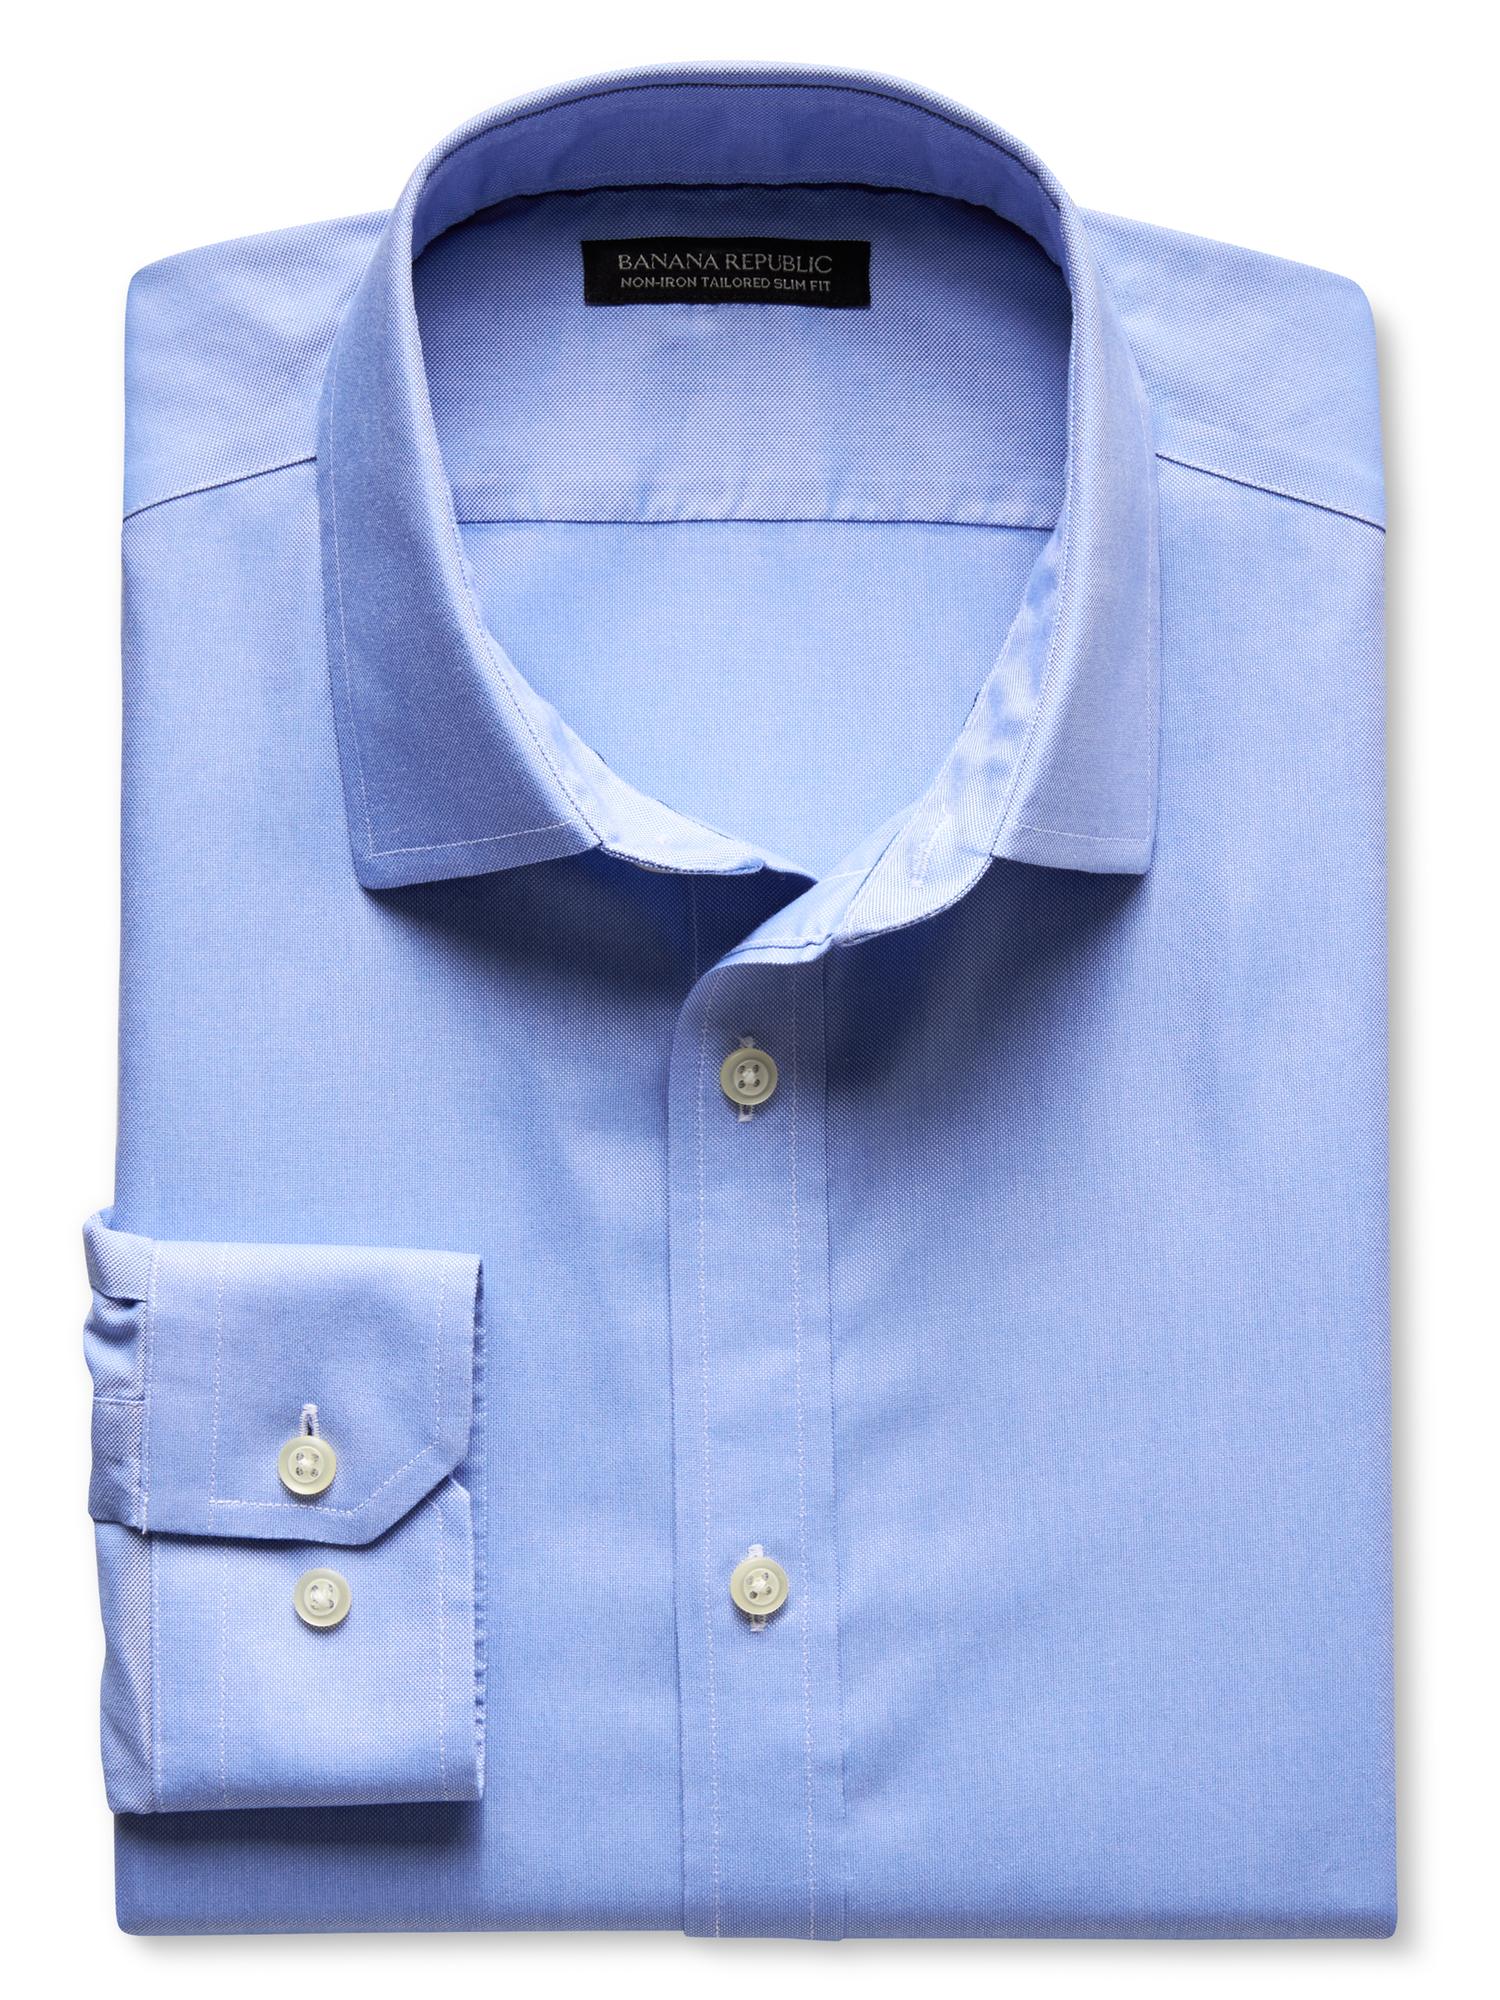 Tailored Slim-Fit Non-Iron Solid Oxford Shirt